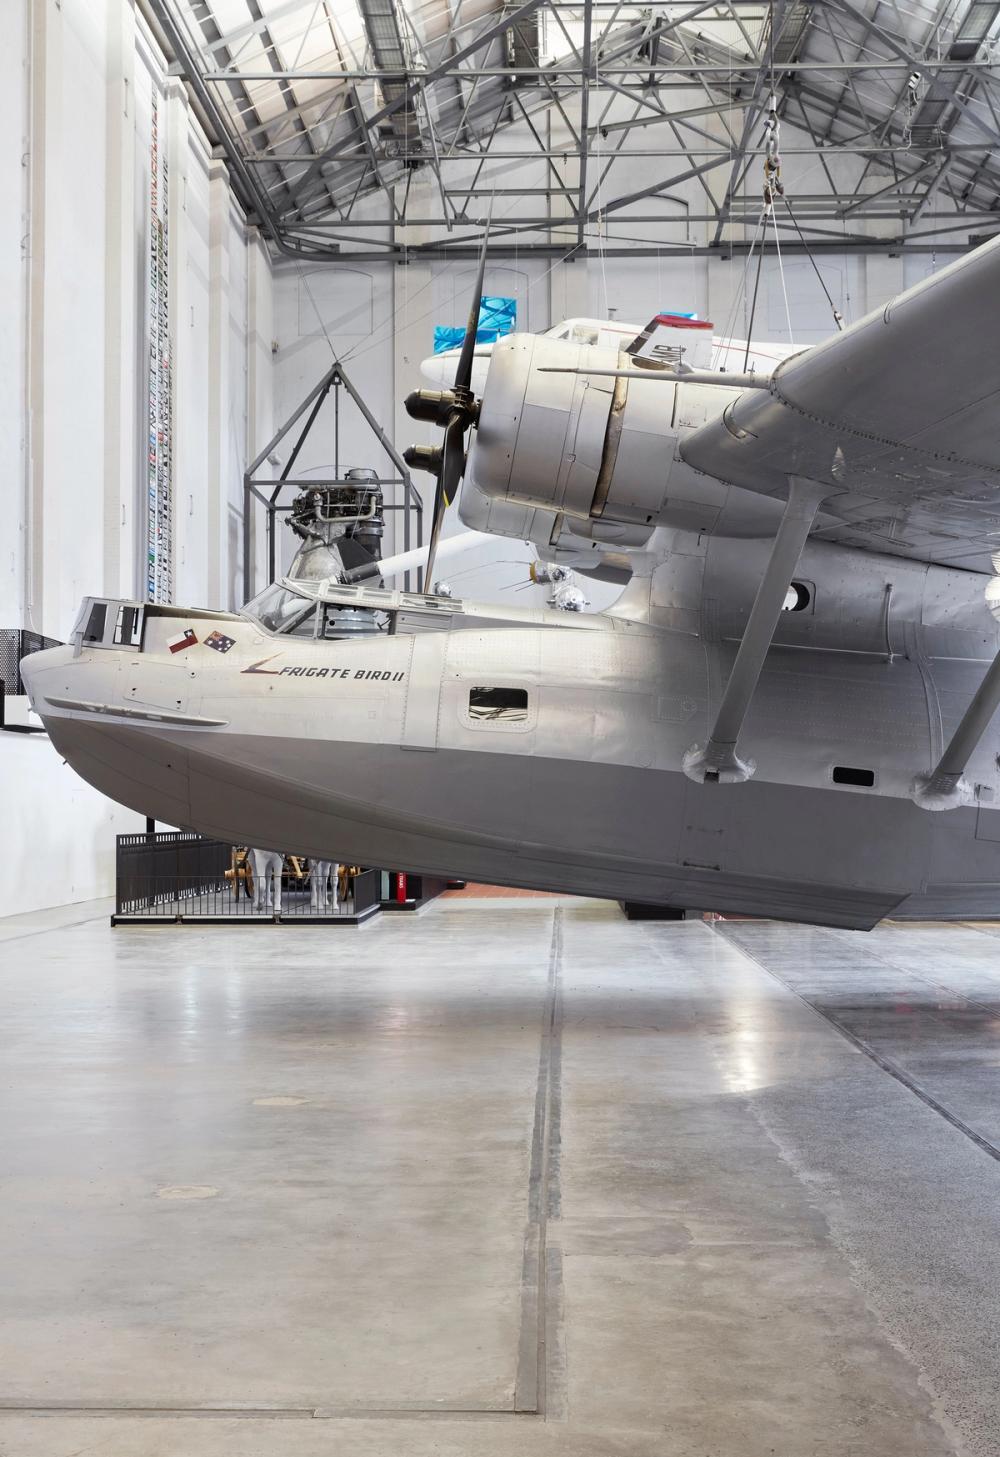 Nose and left propeller of silver plane Catalina Frigate Bird II suspended above the floor.